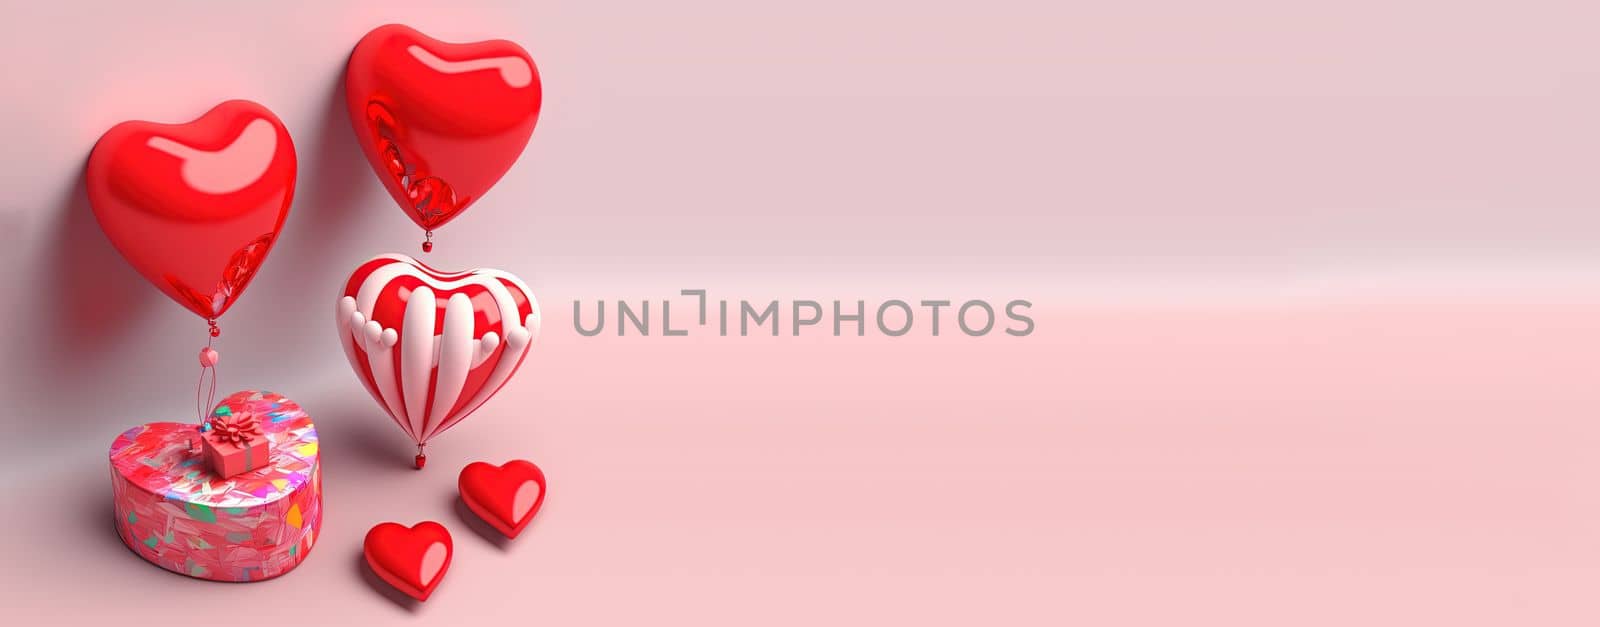 Valentine's Day banner with a sparkling red 3D heart by templator